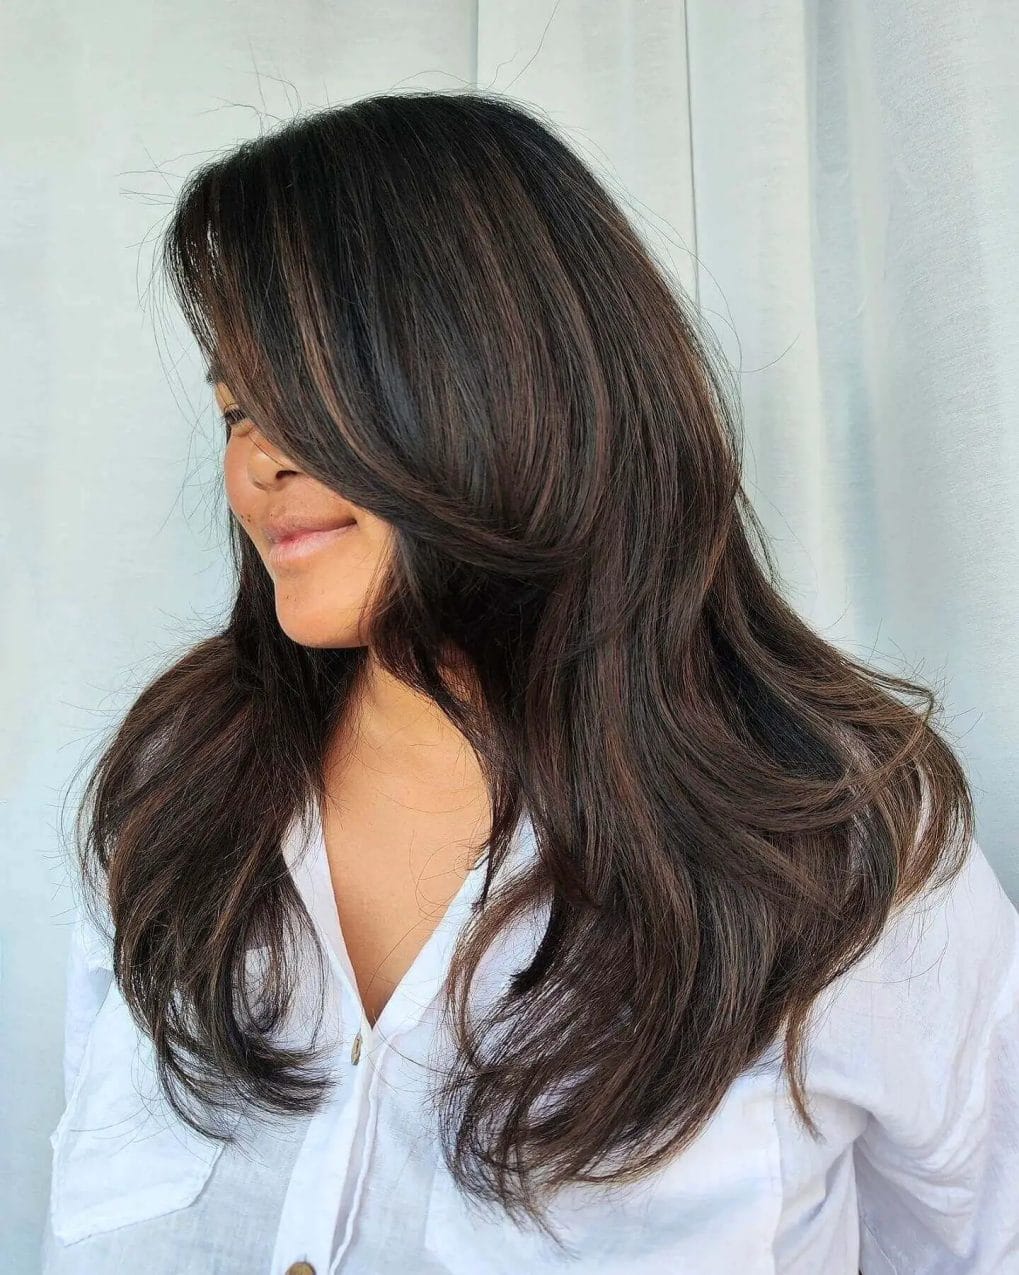 Sun-kissed brunette with dimensional layers, airy blowout style.